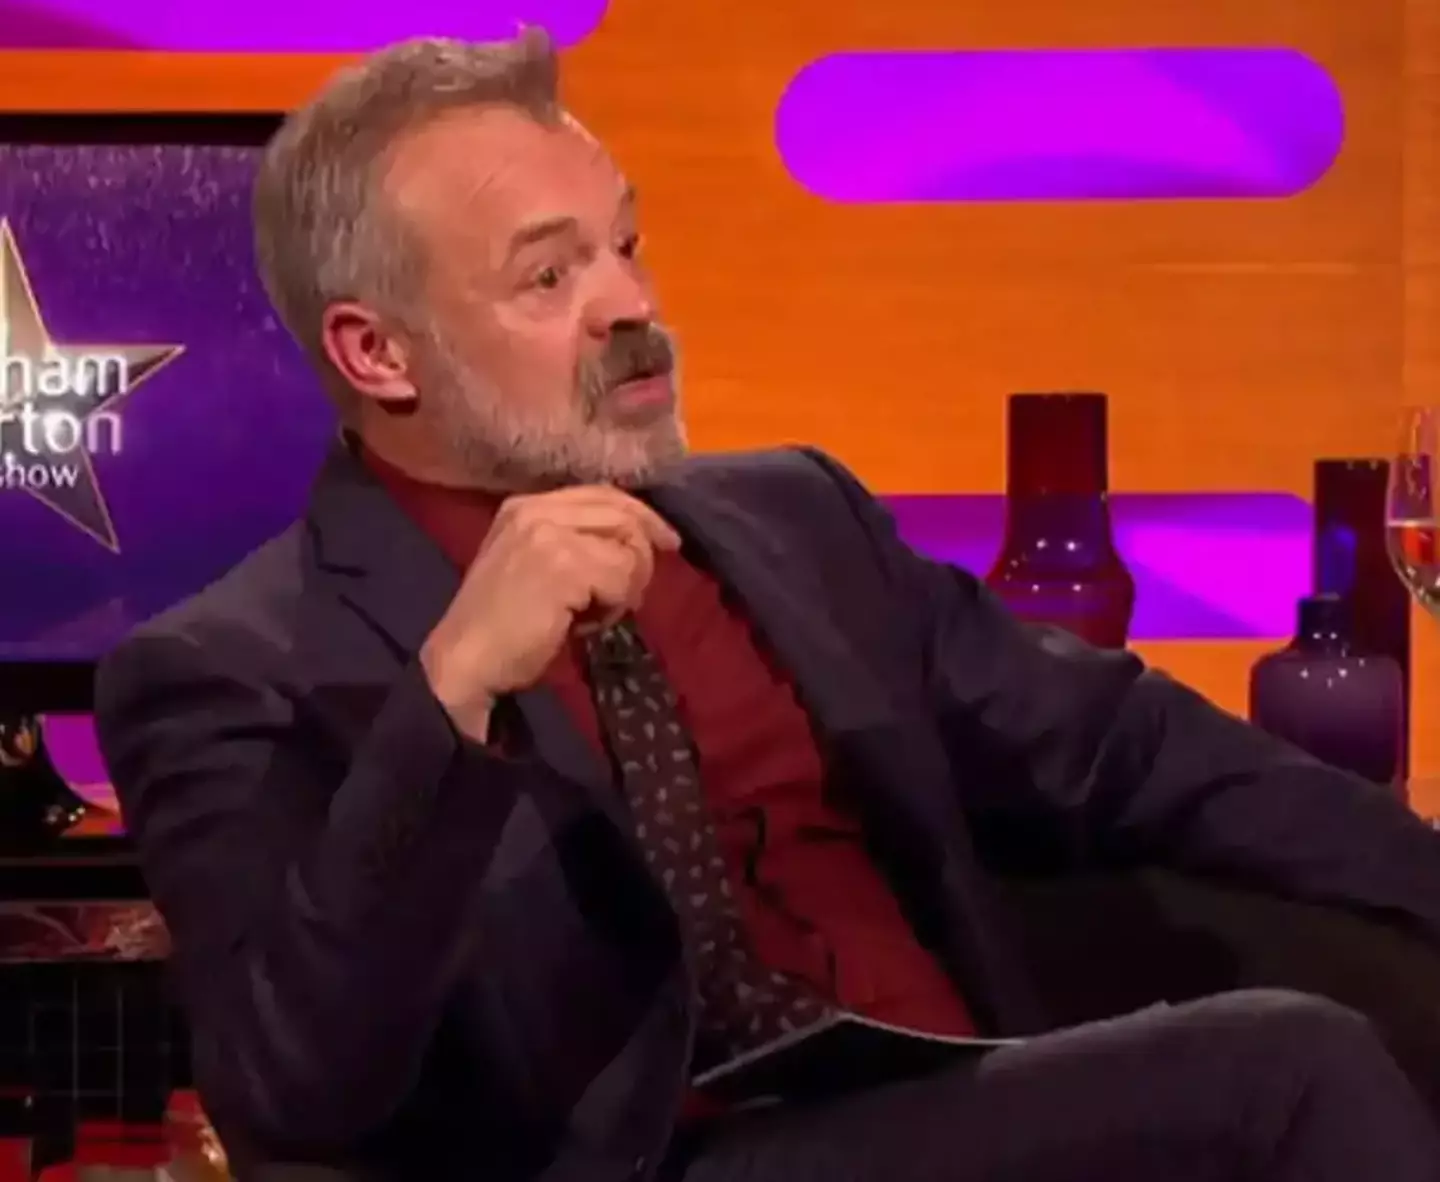 Graham Norton has interviewed hundreds of people over the years.